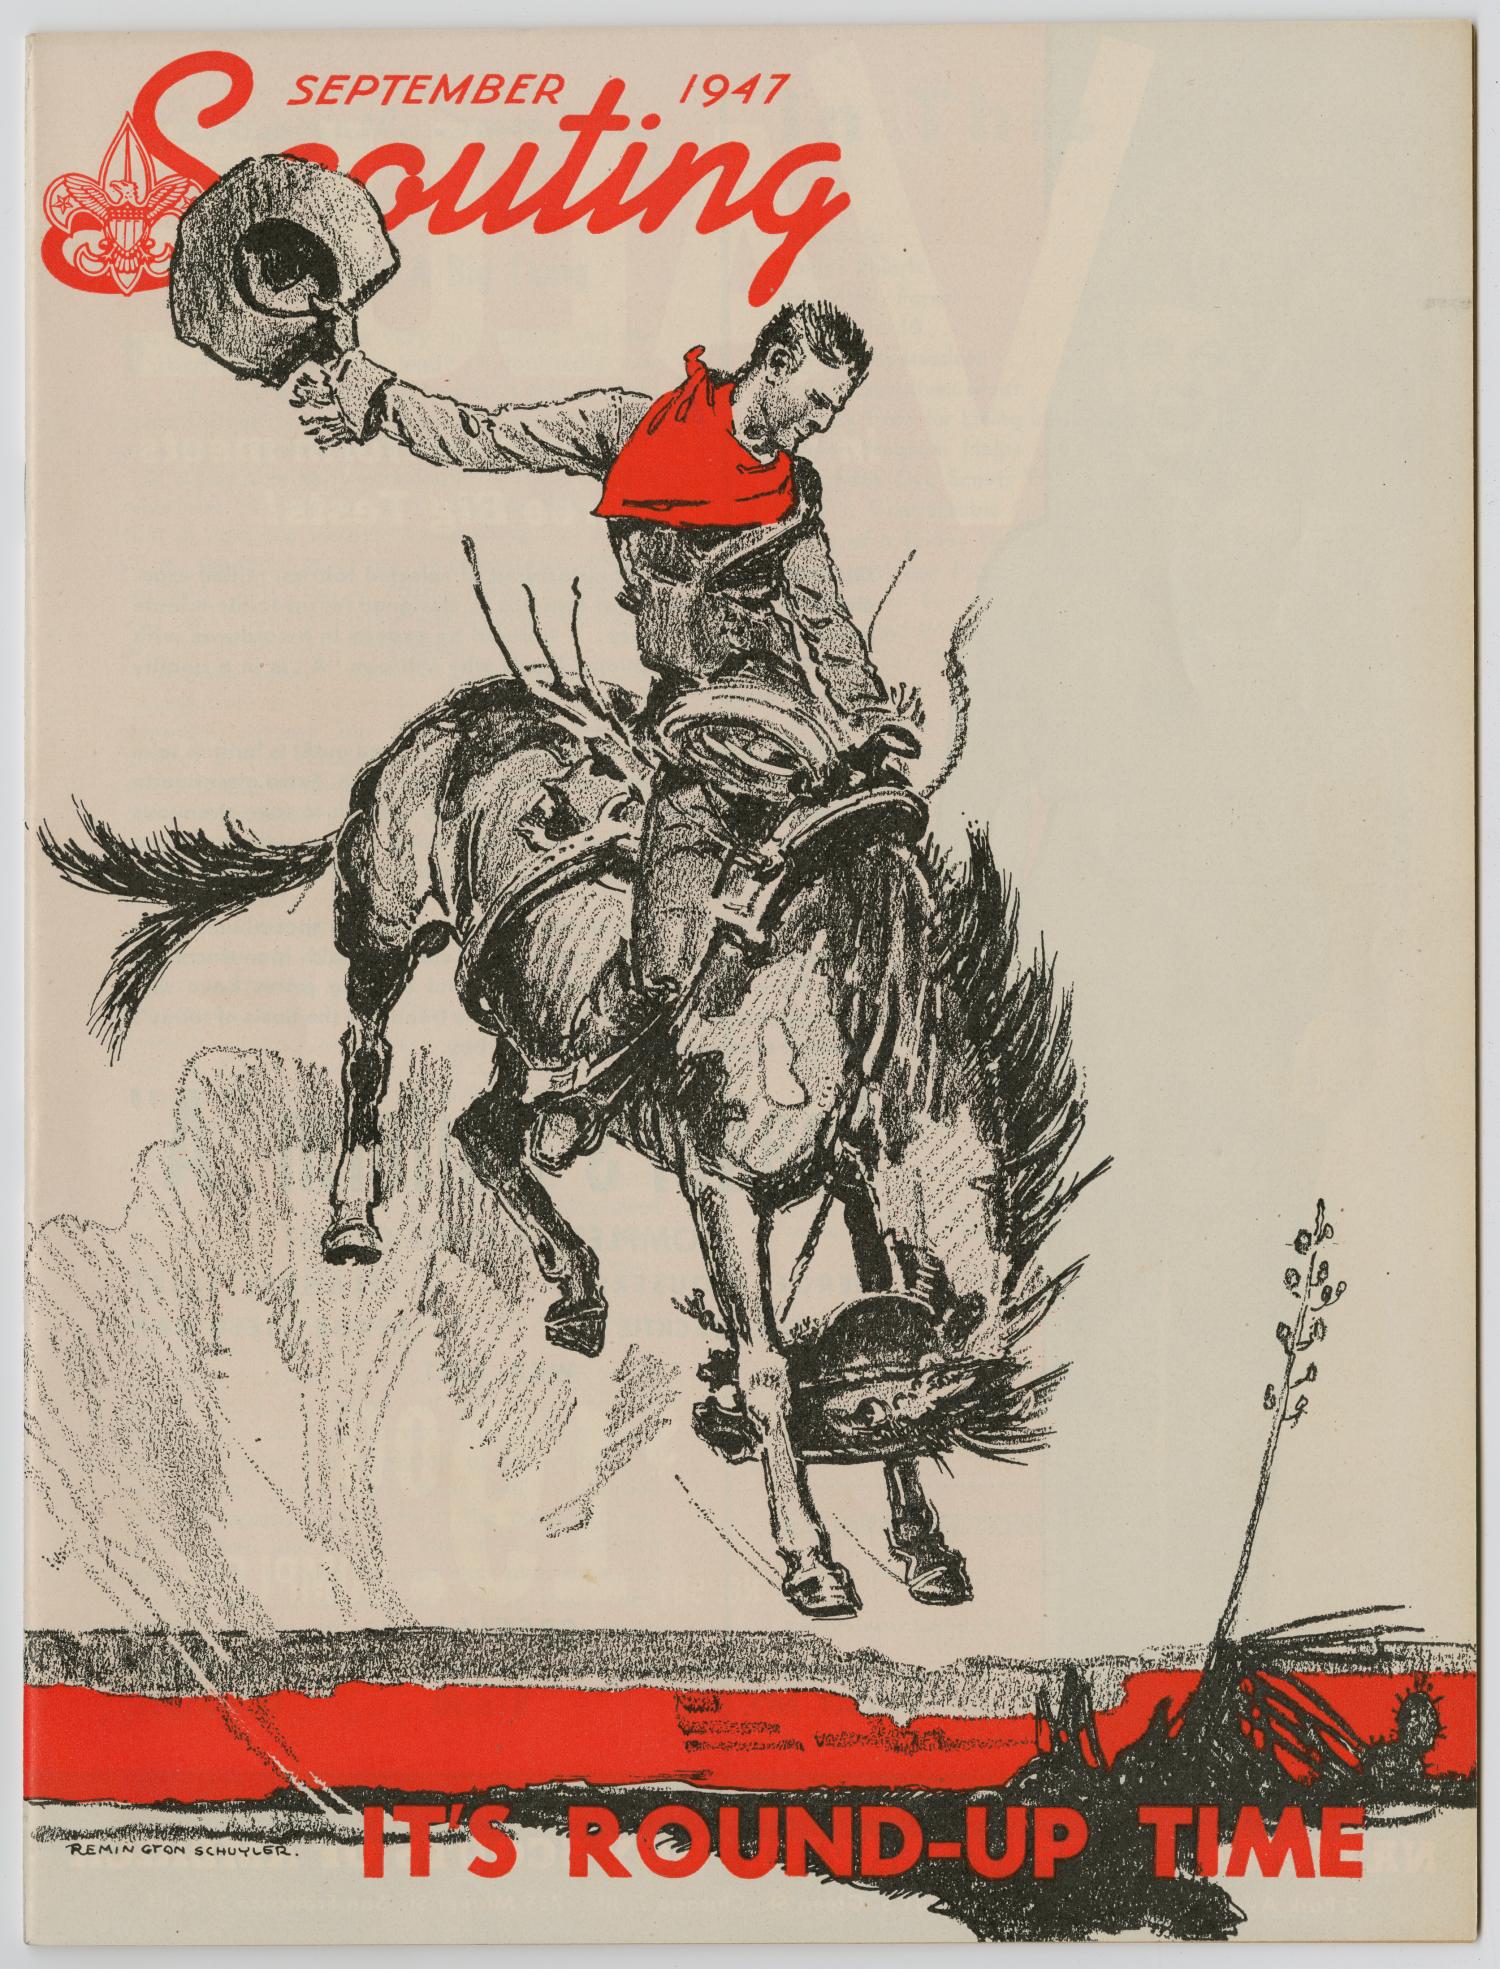 Scouting, Volume 35, Number 7, September 1947
                                                
                                                    Front Cover
                                                